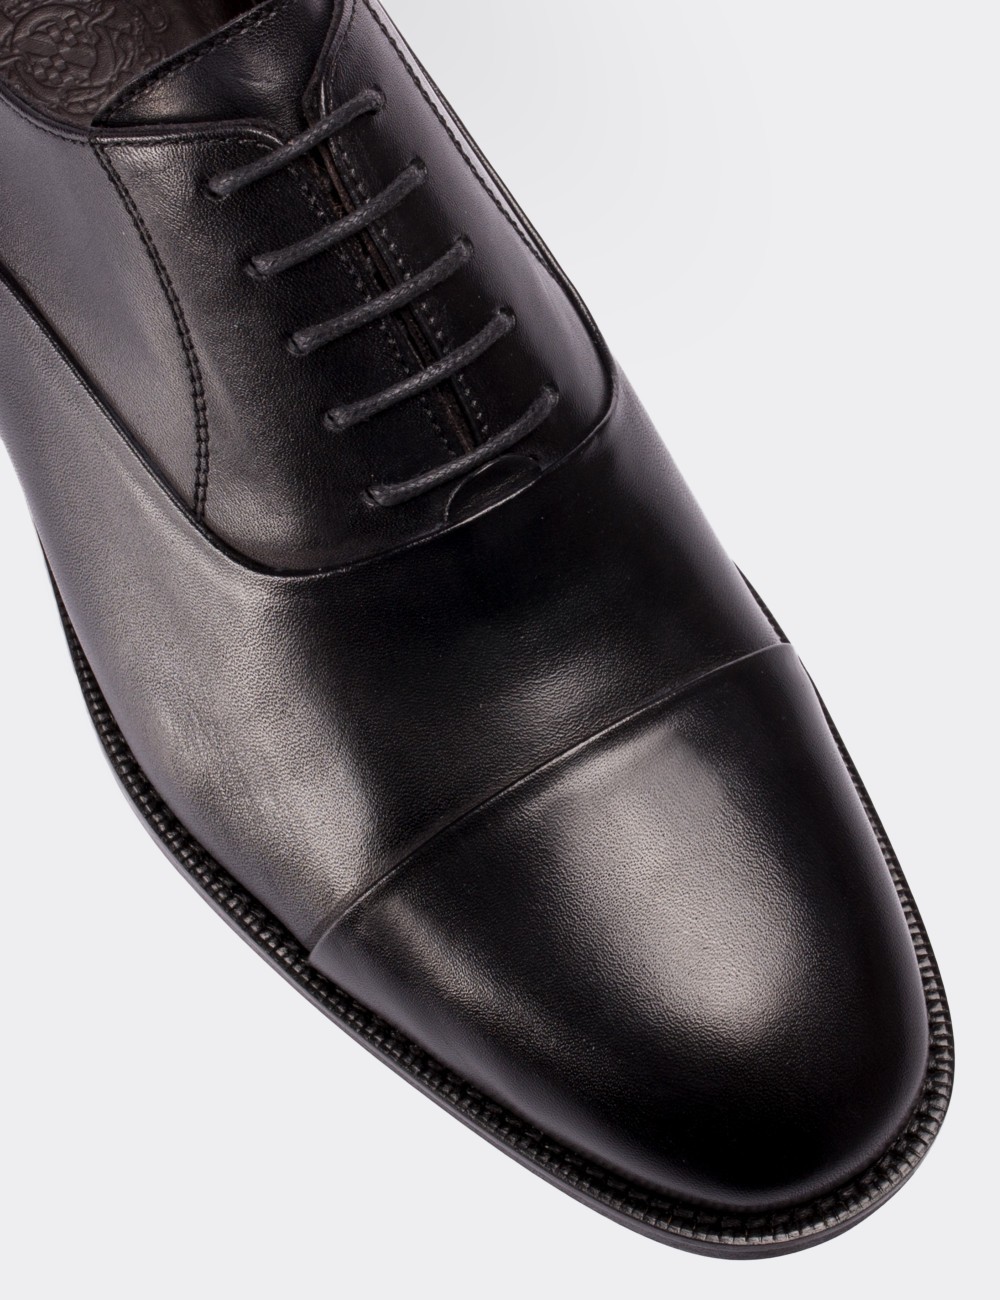 Black  Leather Classic Shoes - 01590MSYHM01